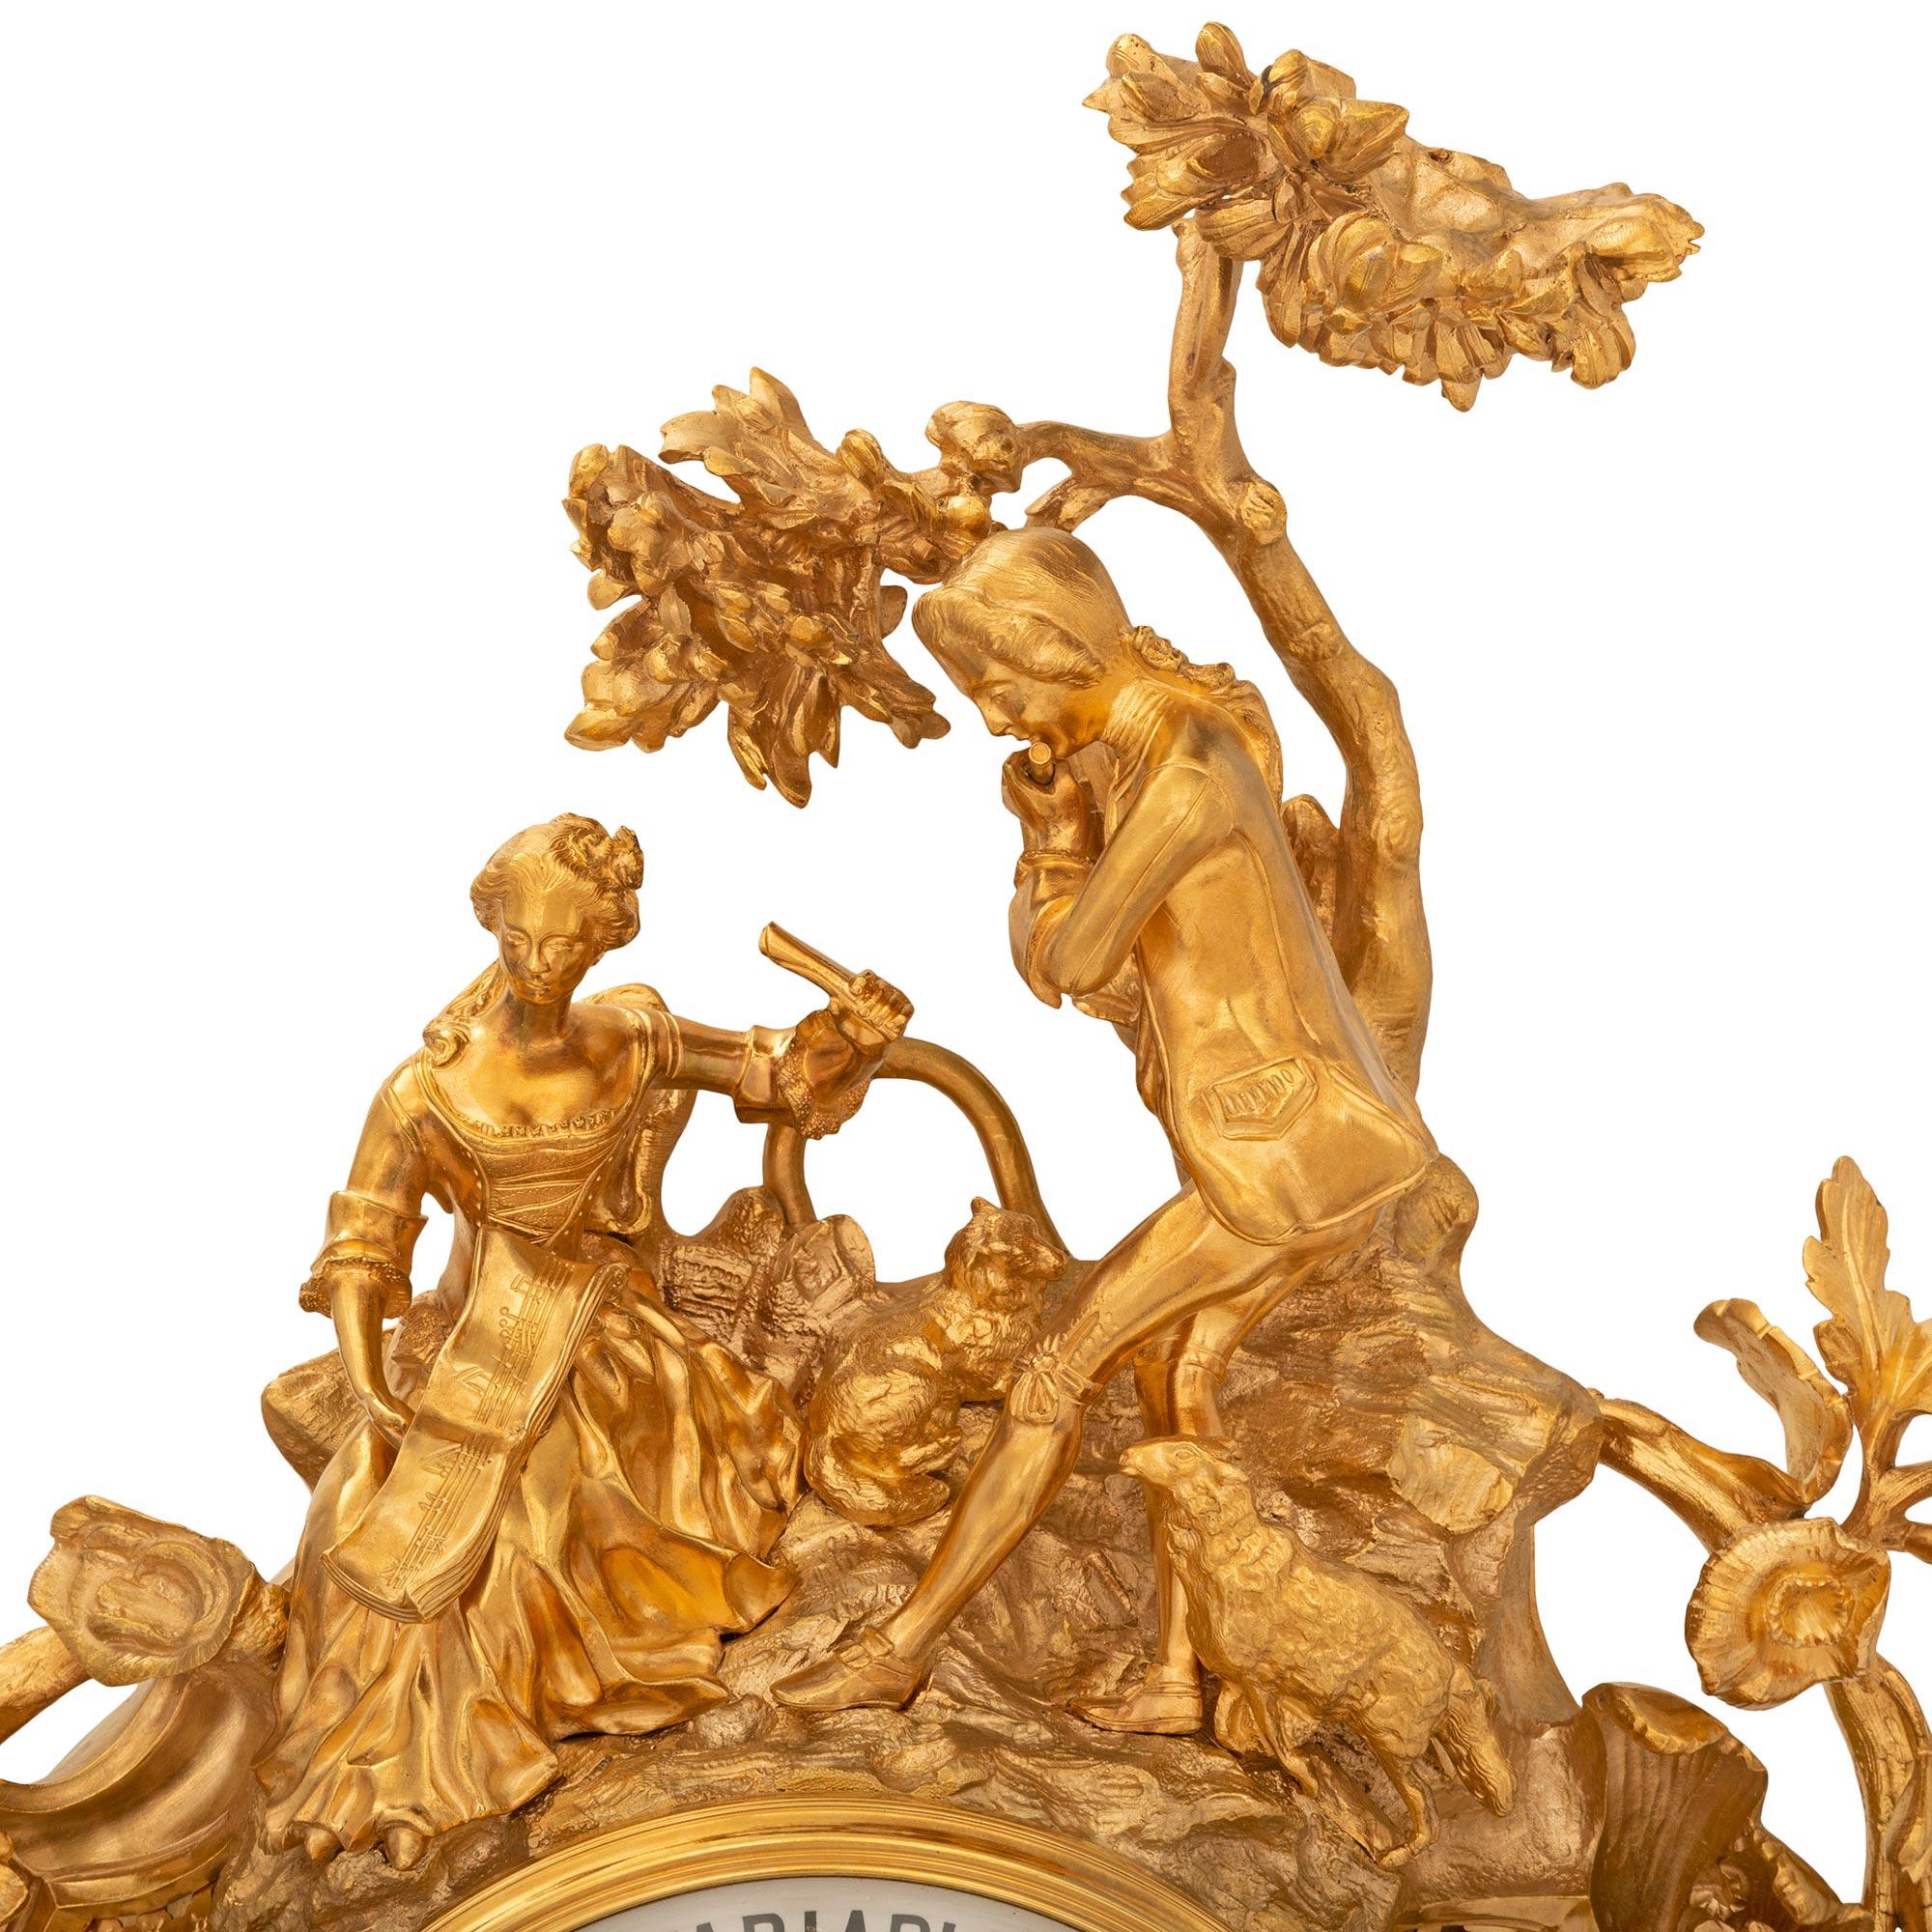 A most impressive and large scale pair of French 18th century Louis XV period cartel clock and barometer signed Le Roy & Cie, Paris. Each ormolu case has a exquisite a symmetrical design with scrolled foliate movements amidst richly chased branches